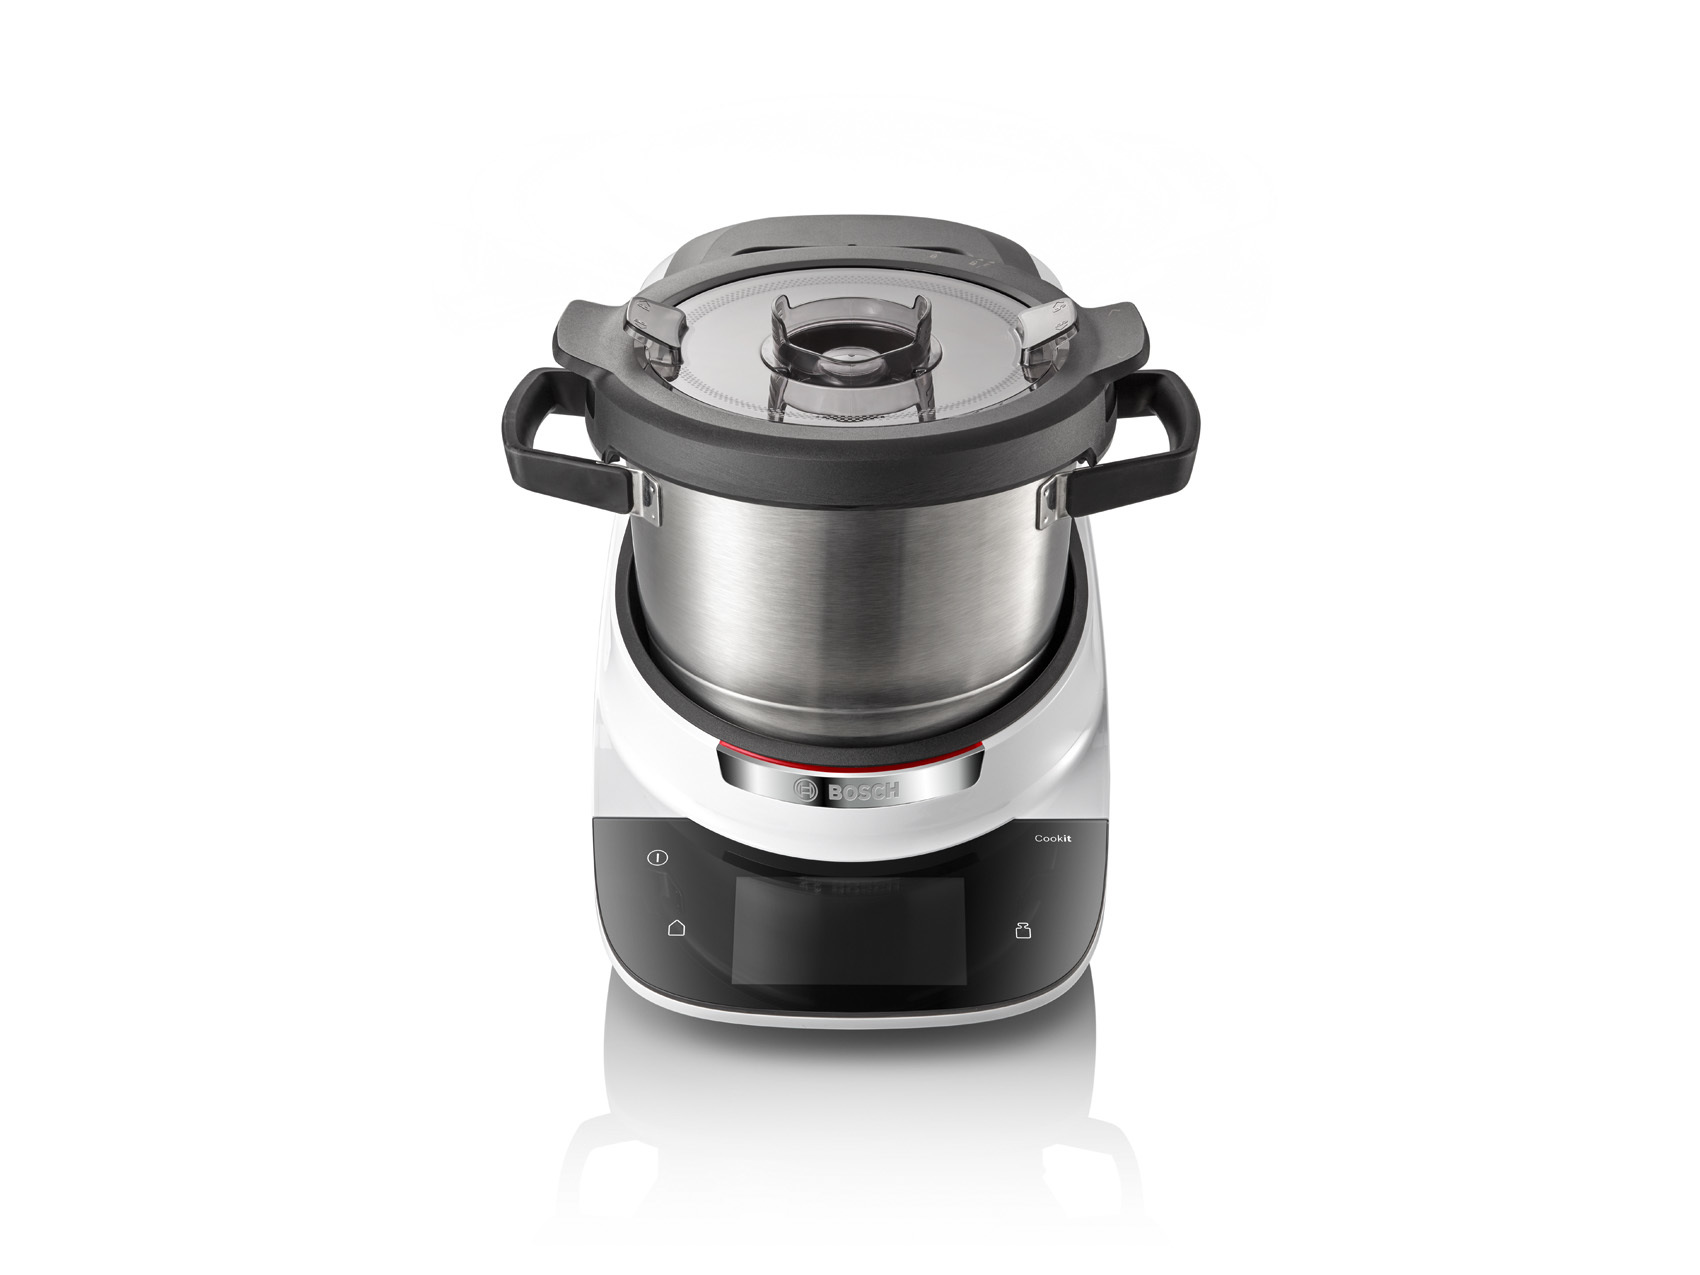 BOSCH Cookit Food Processor with cooking capabilities